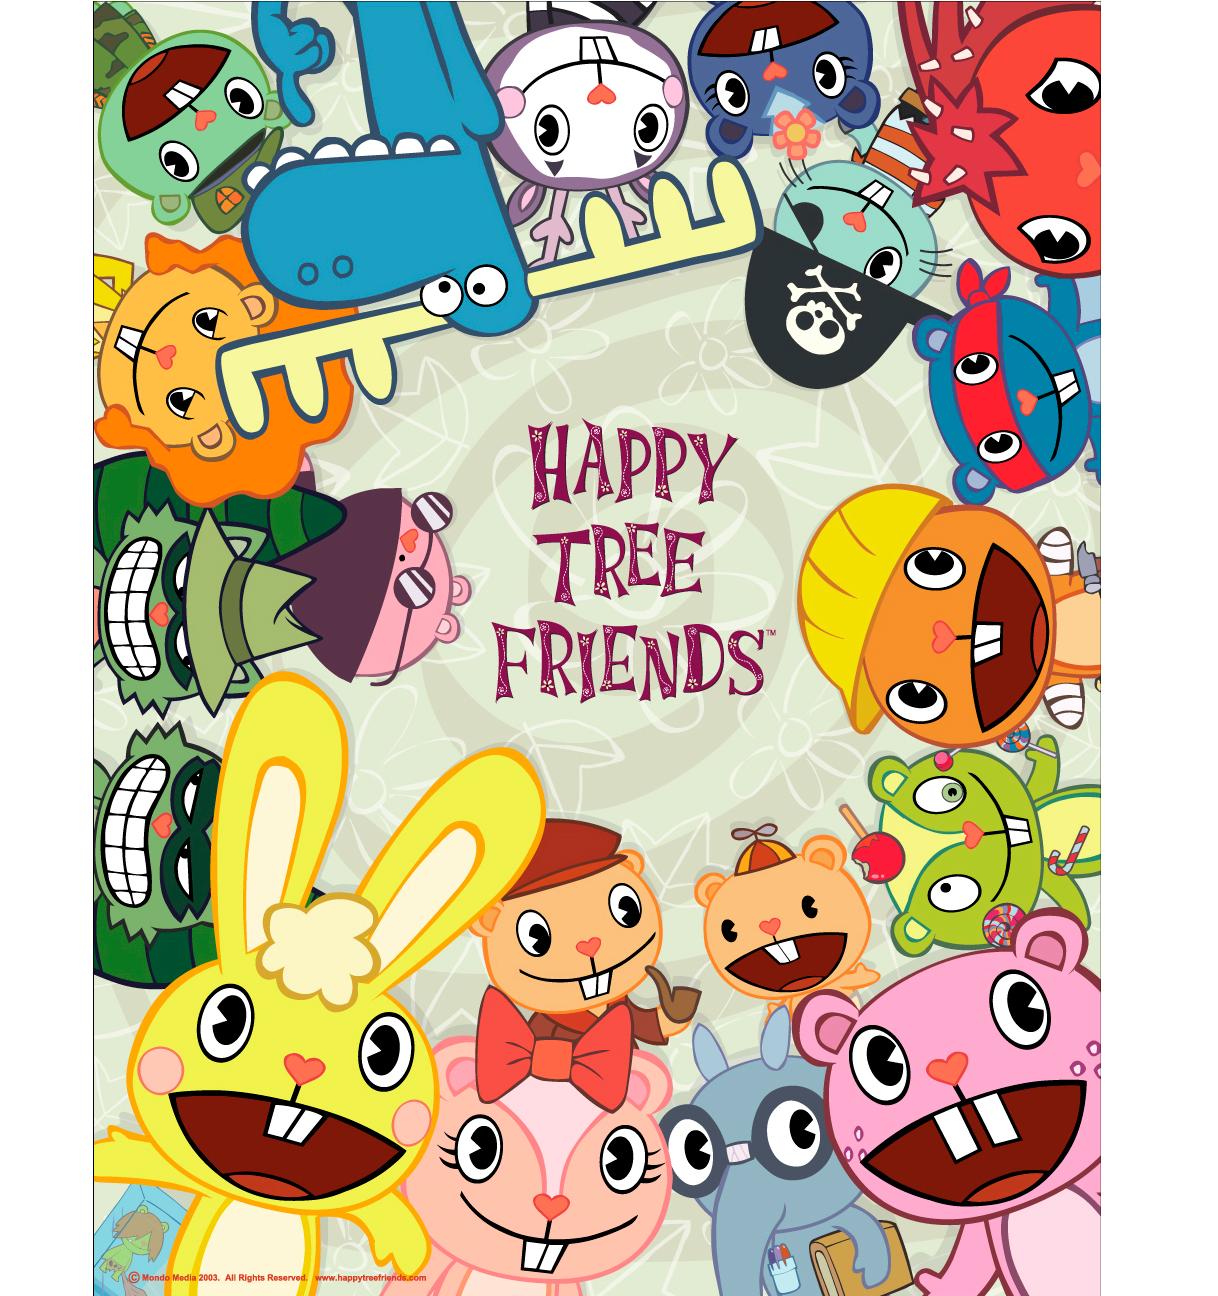 Happy Tree Friends poster - Happy Tree Friends Images, Pictures, Photos ...